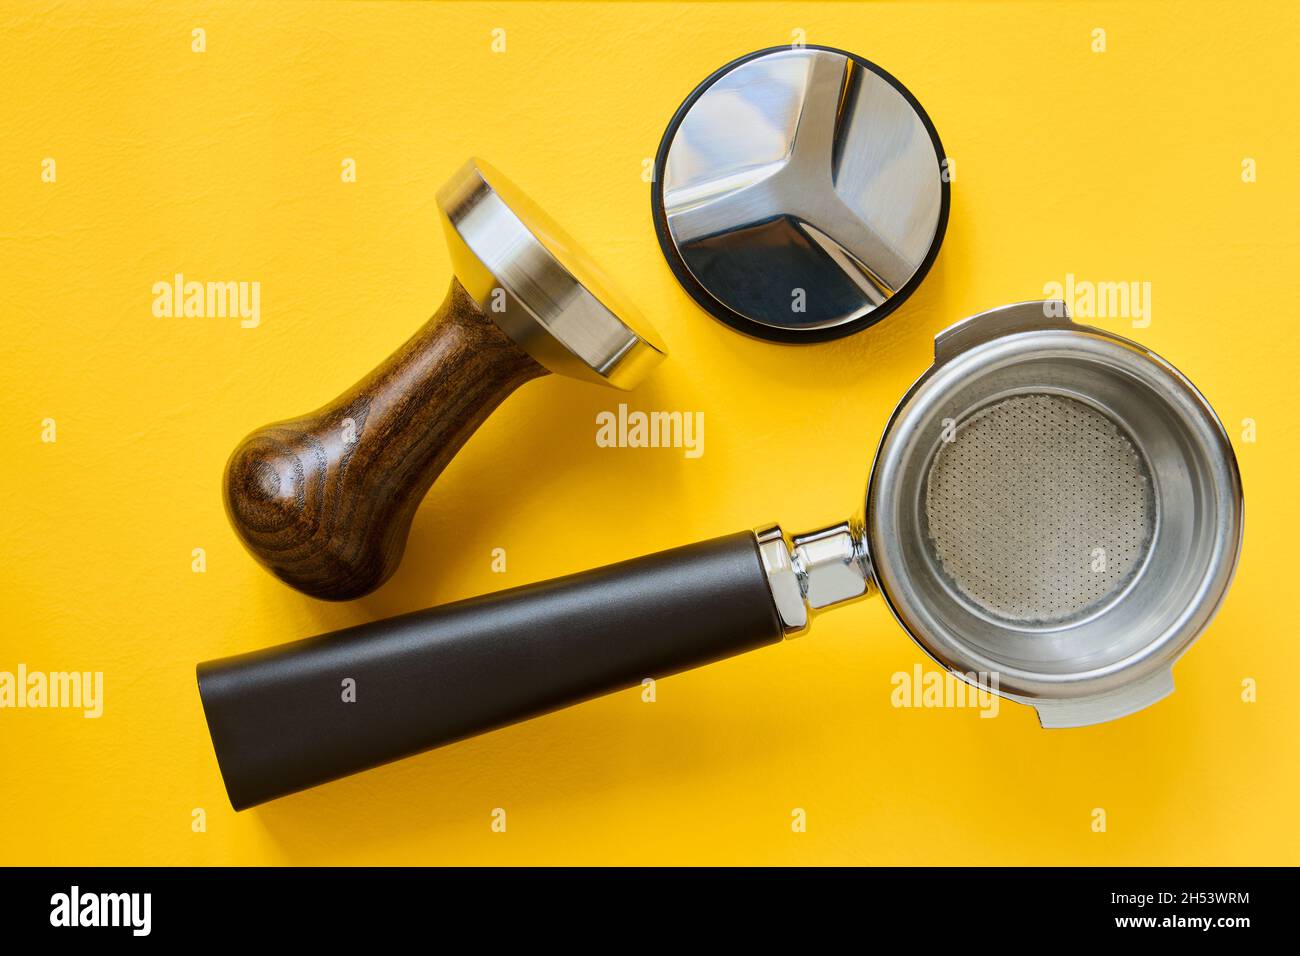 Coffee making tools, coffee basket holder, flattening and tamper on yellow background Stock Photo